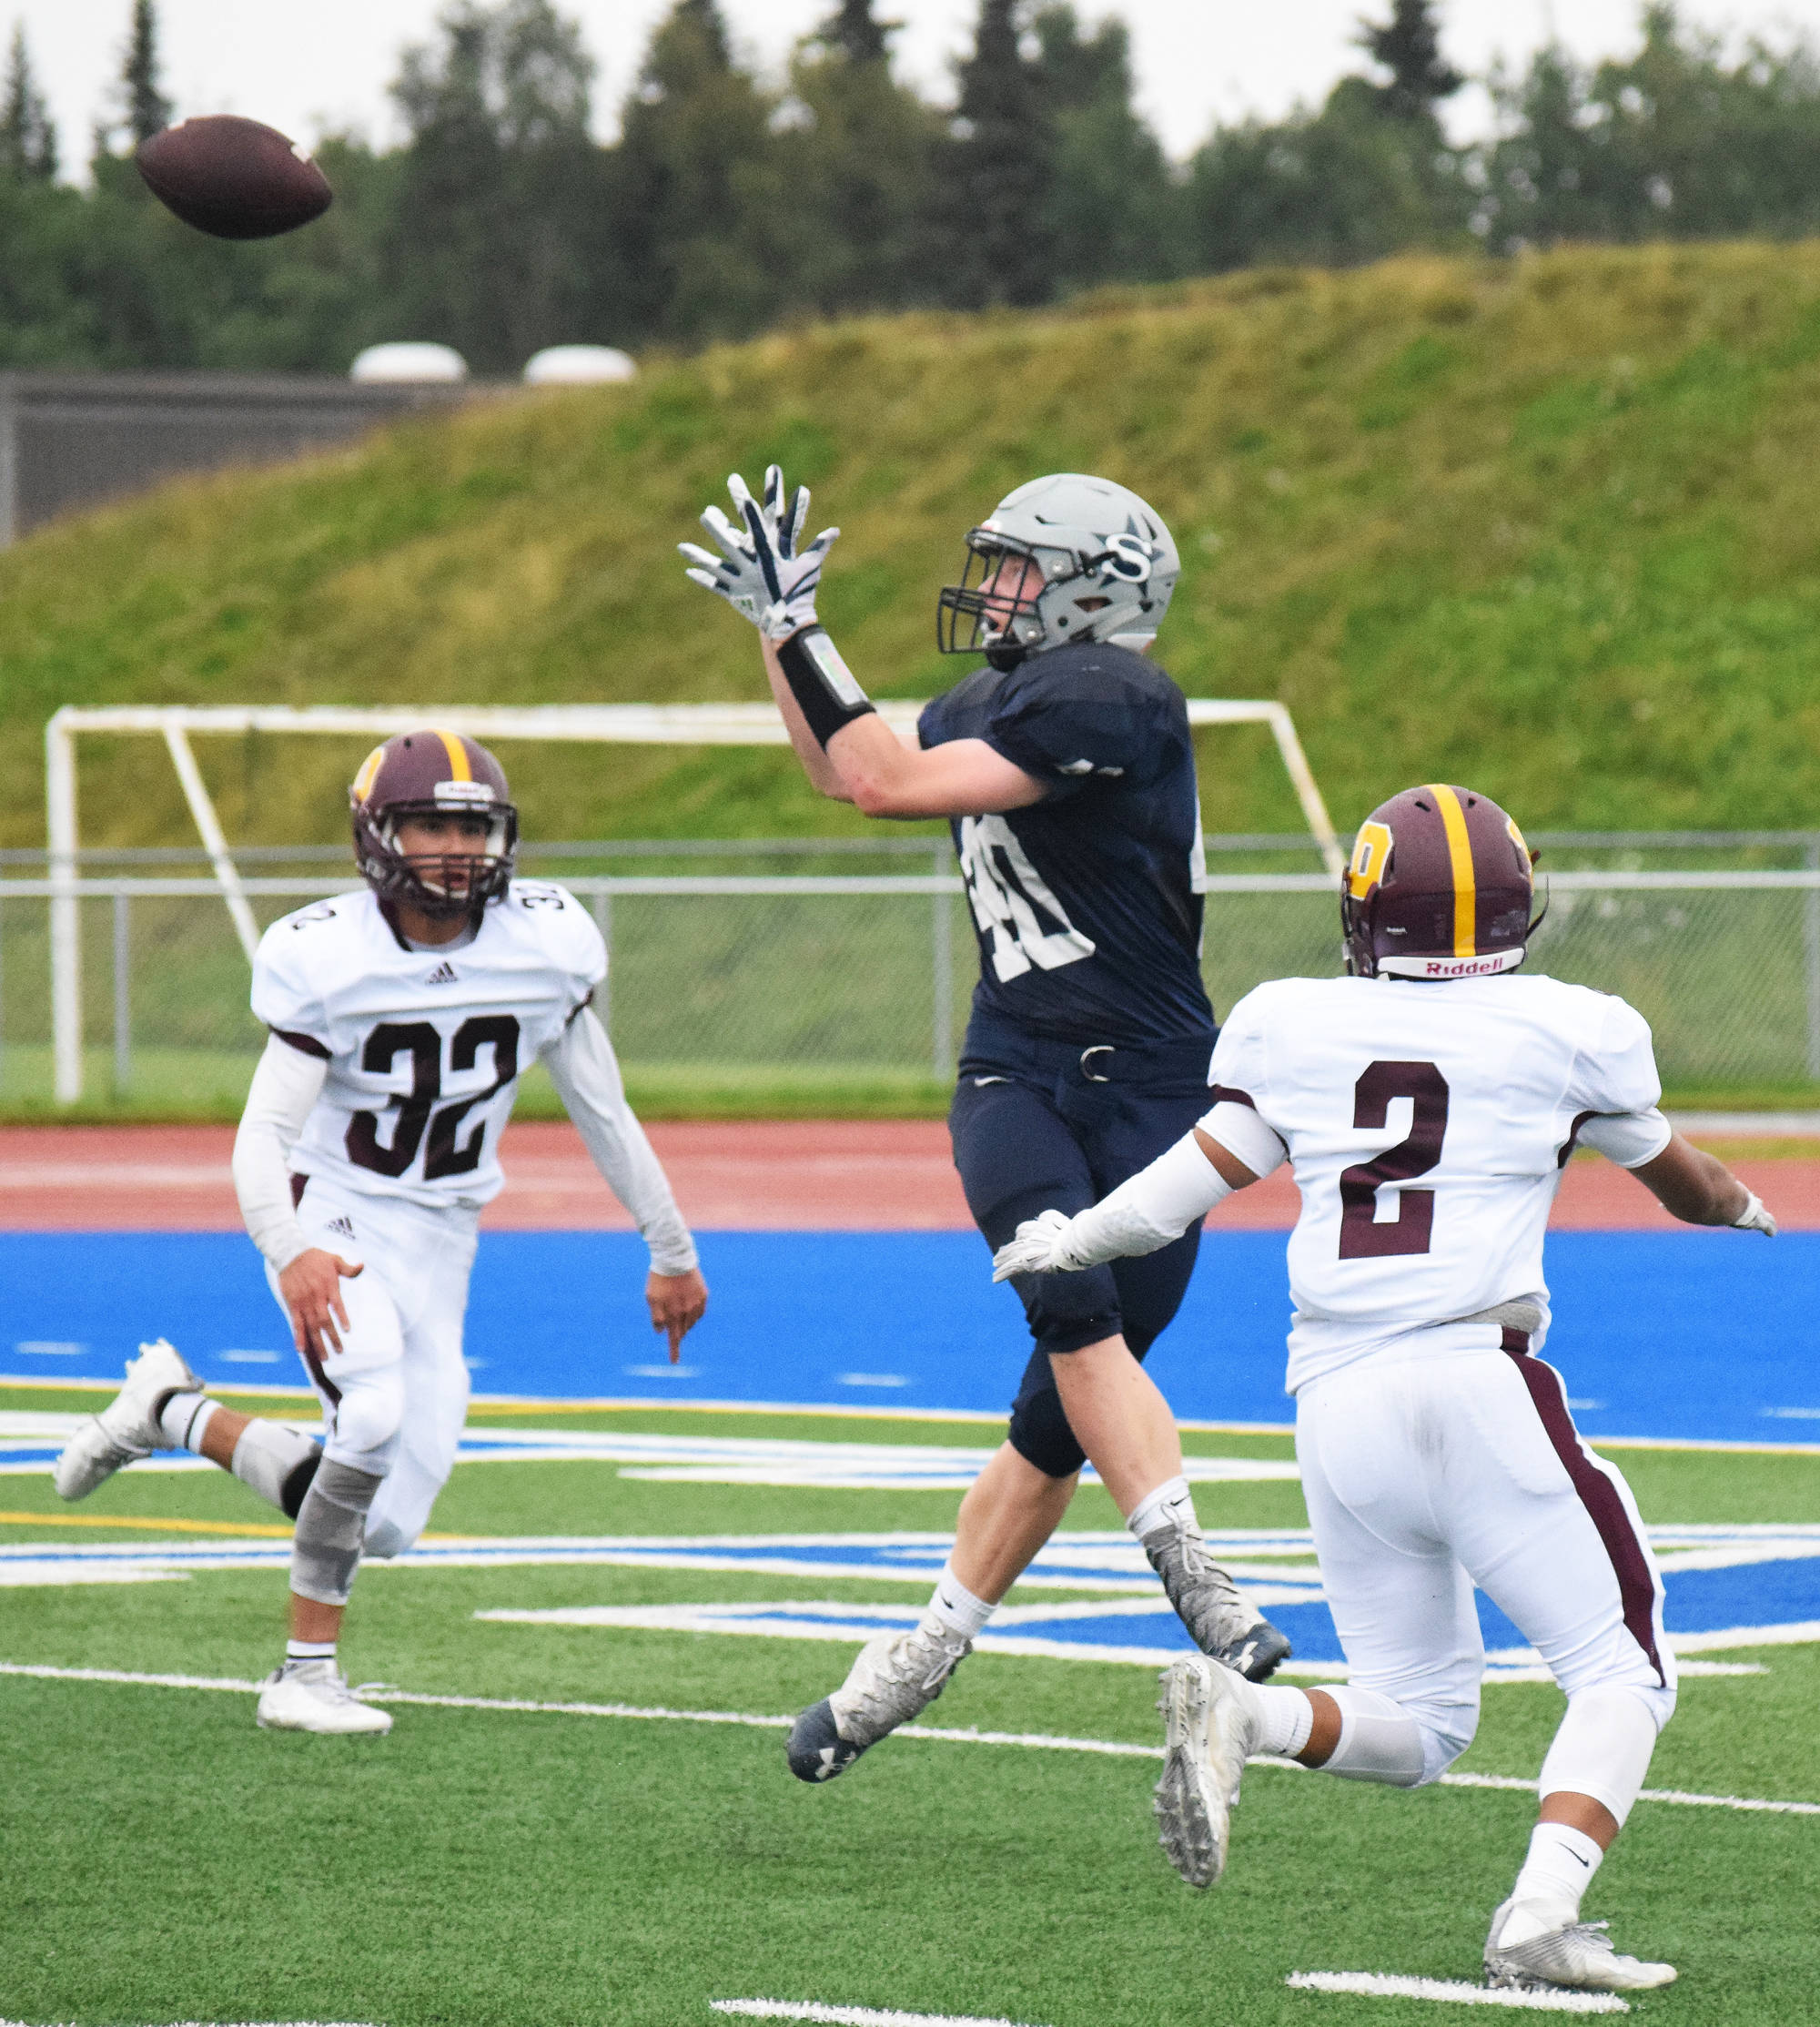 Soldotna tight end Galen Brantley III hauls in a touchdown pass Friday night against Dimond at Justin Maile Field in Soldotna. (Photo by Joey Klecka/Peninsula Clarion)